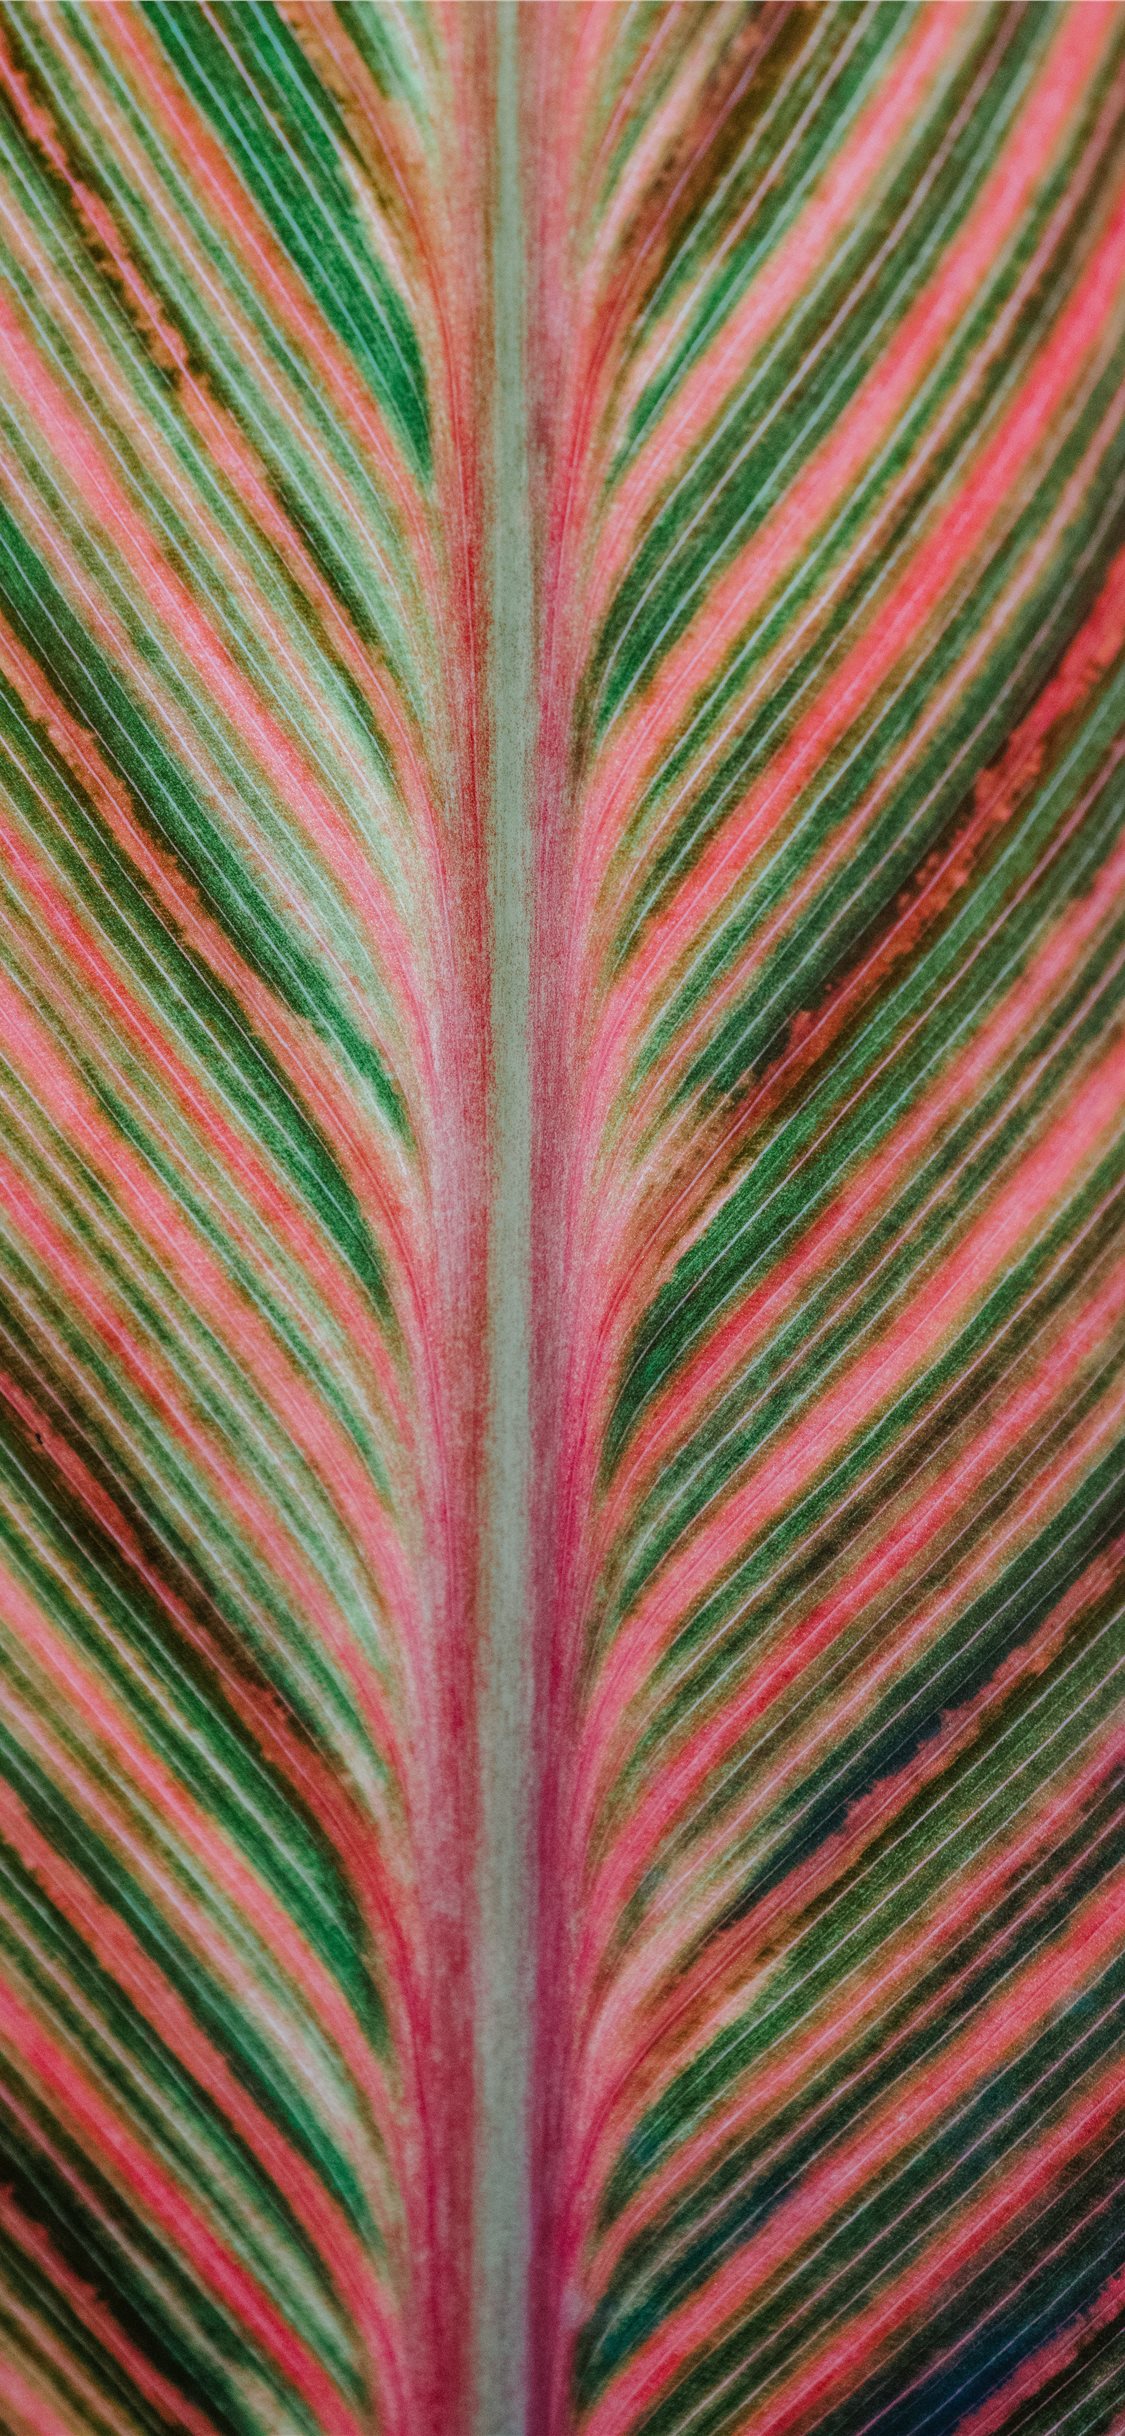 Pink and green striped leaf iphone x wallpapers free download